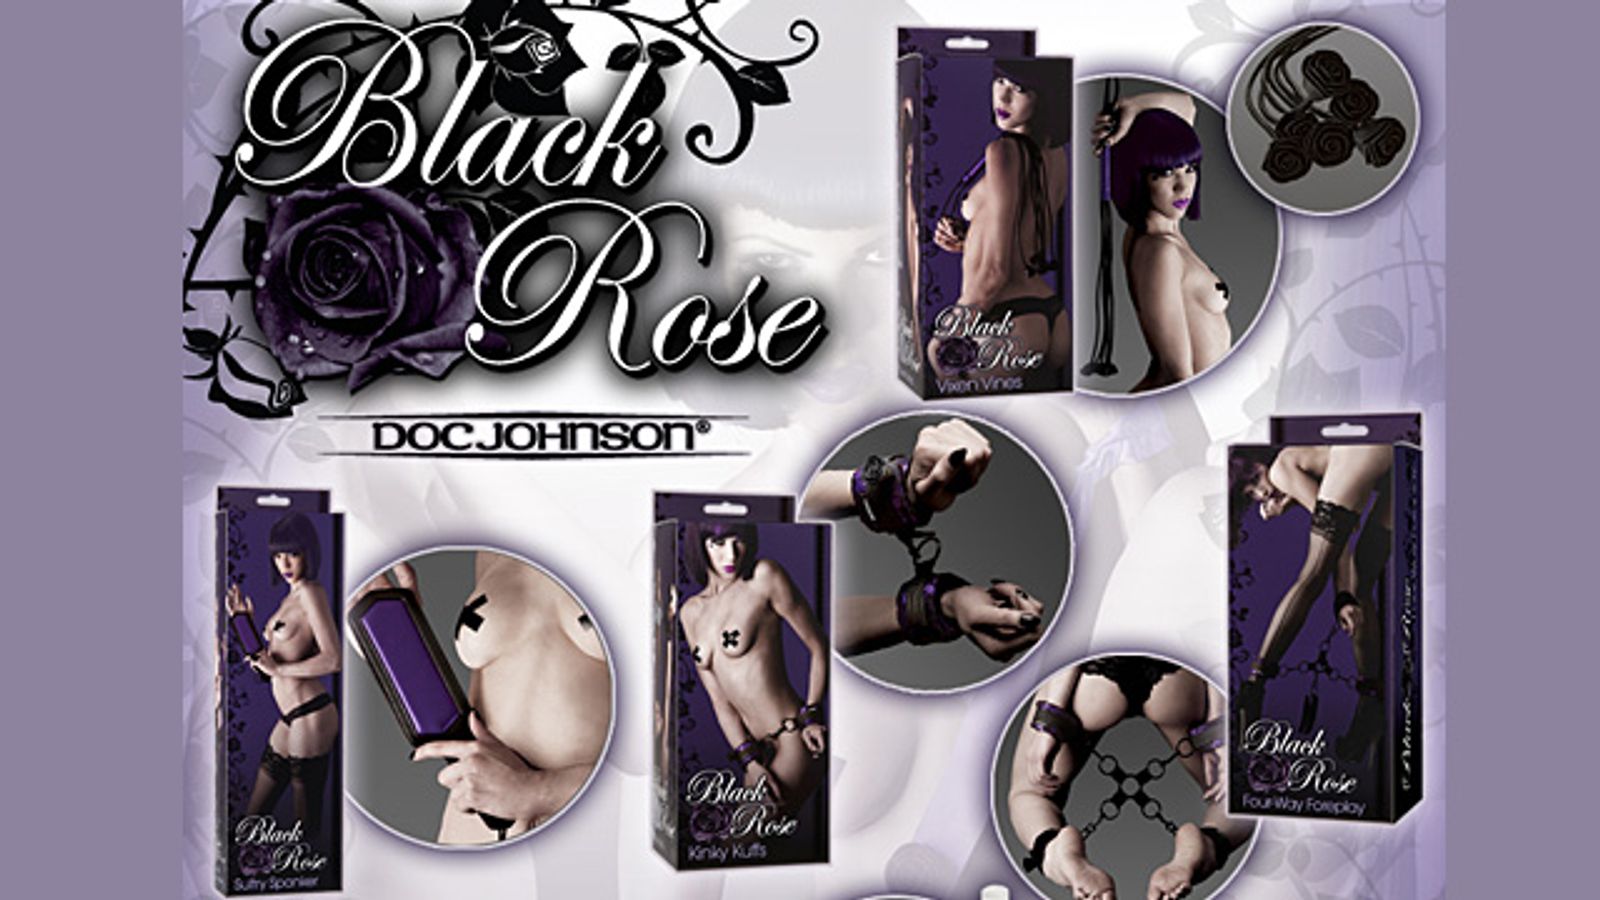 Doc Johnson Expands Best-Selling Black Rose Collection